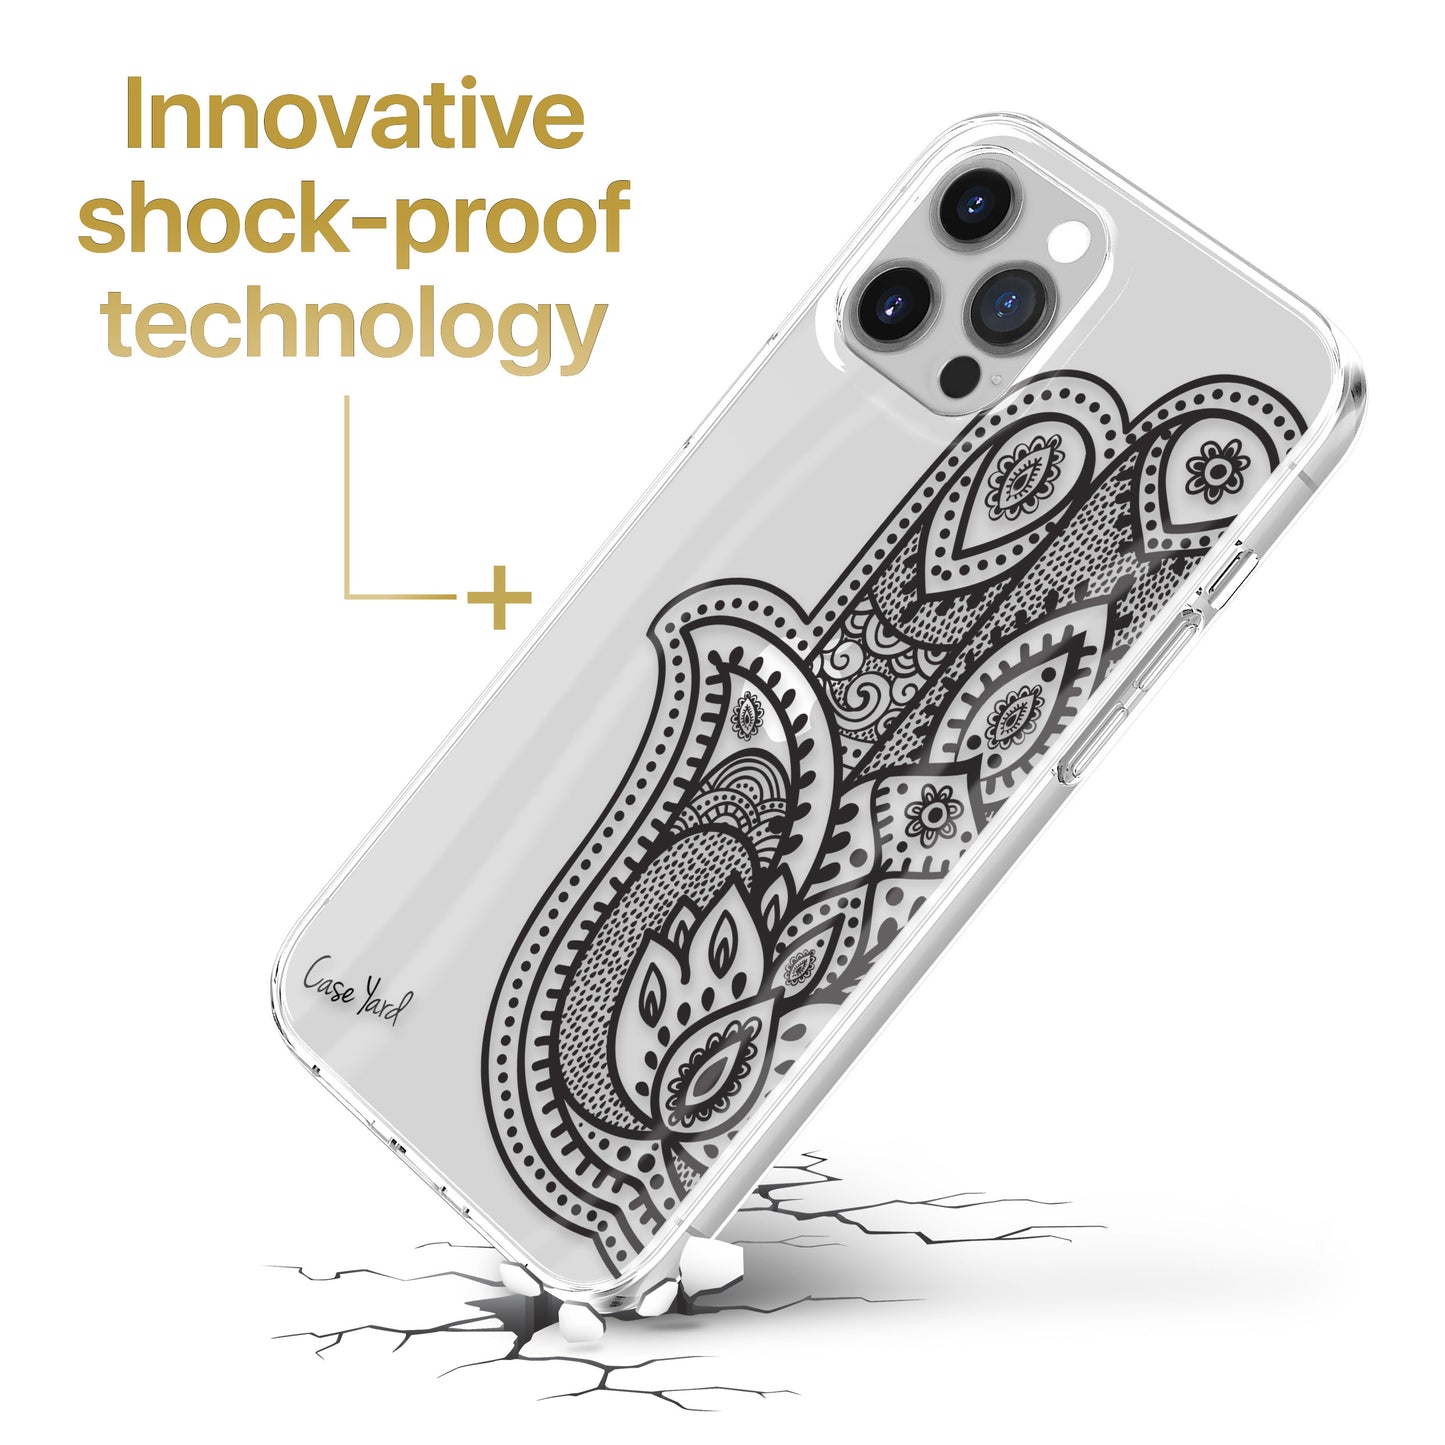 TPU Clear case with (Half Hamsa Hand) Design for iPhone & Samsung Phones